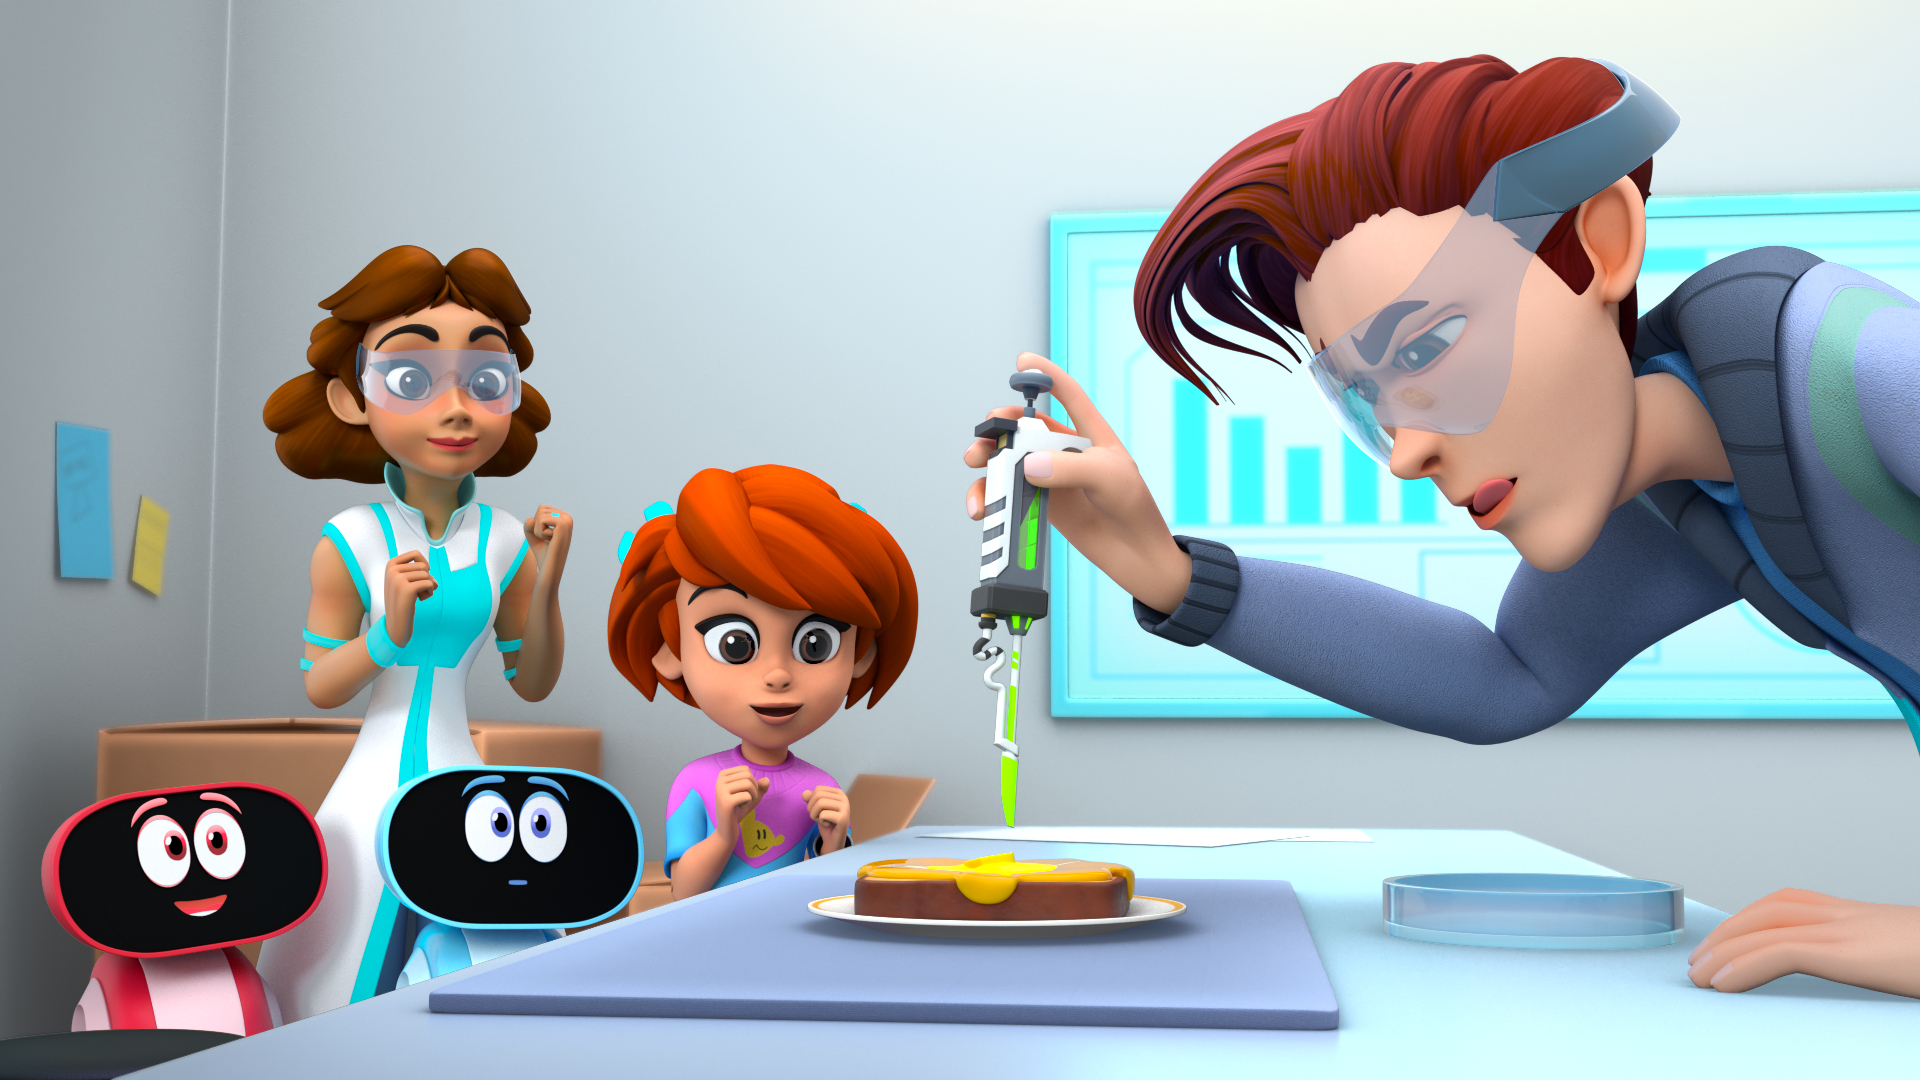 Miko Robot Makes Streaming Debut in New Animated Series | Business Wire